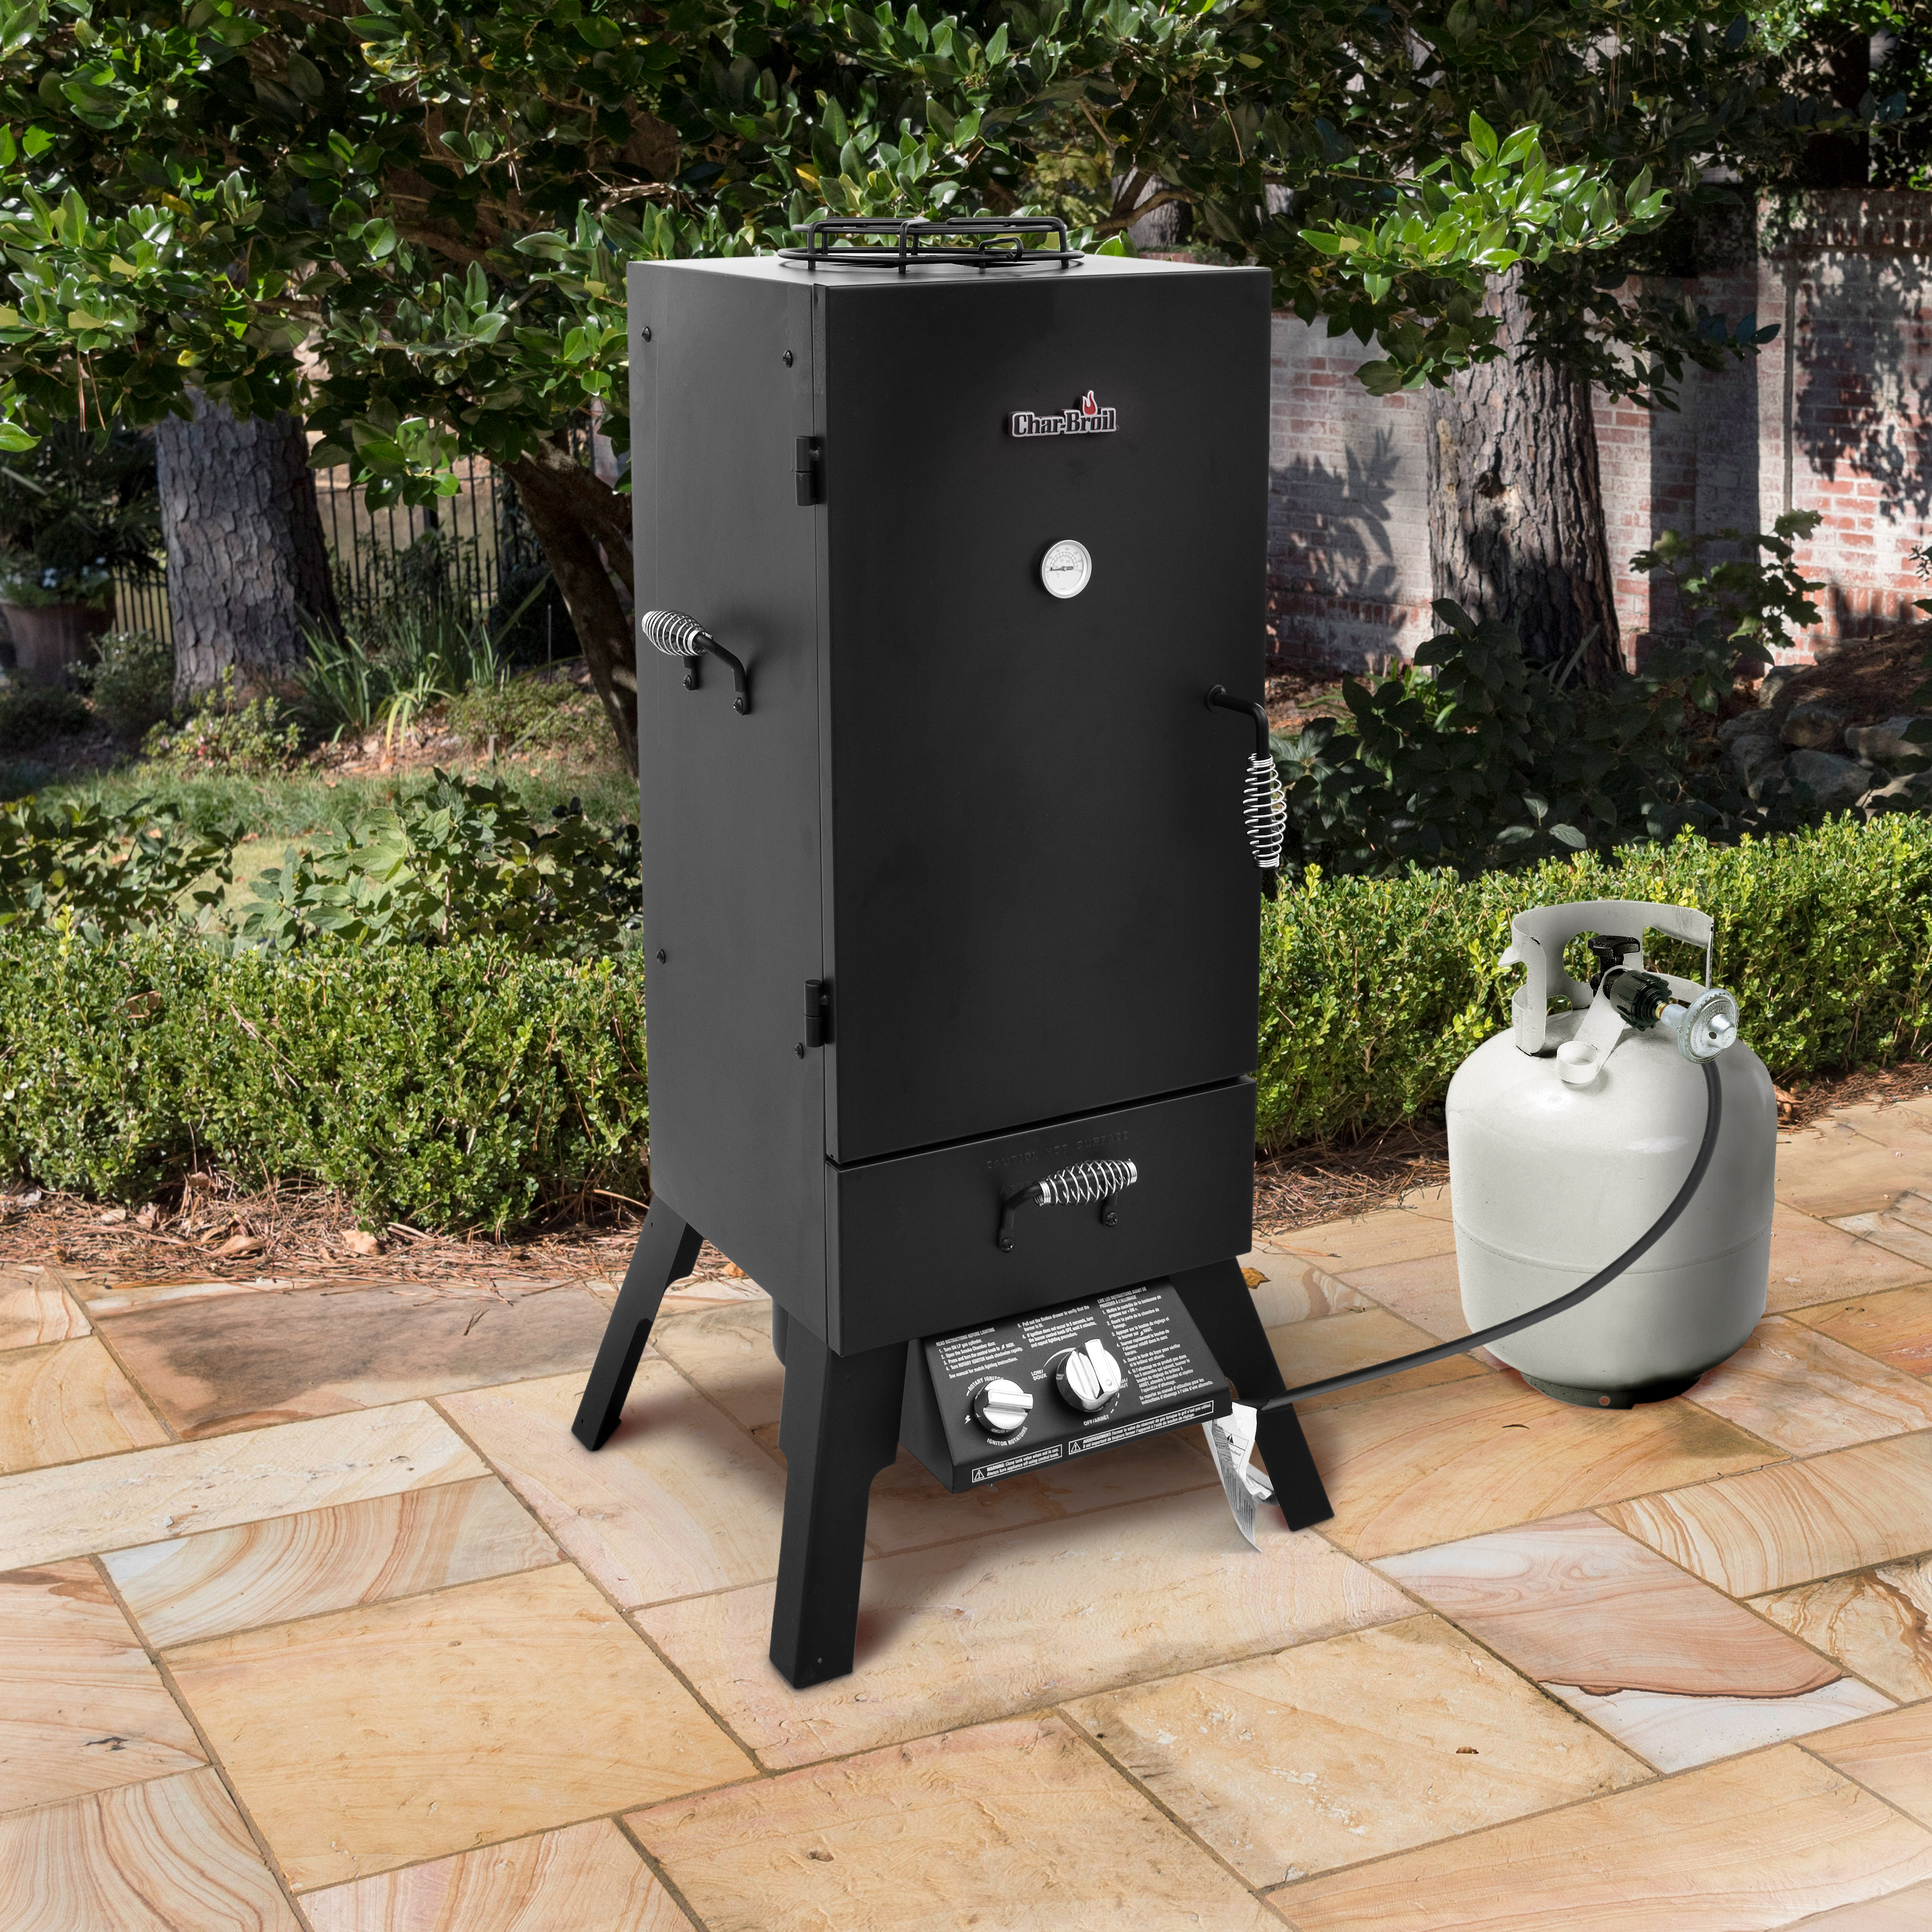 Masterbuilt Propane Smoker with Thermostat Control, 40 inch, Black